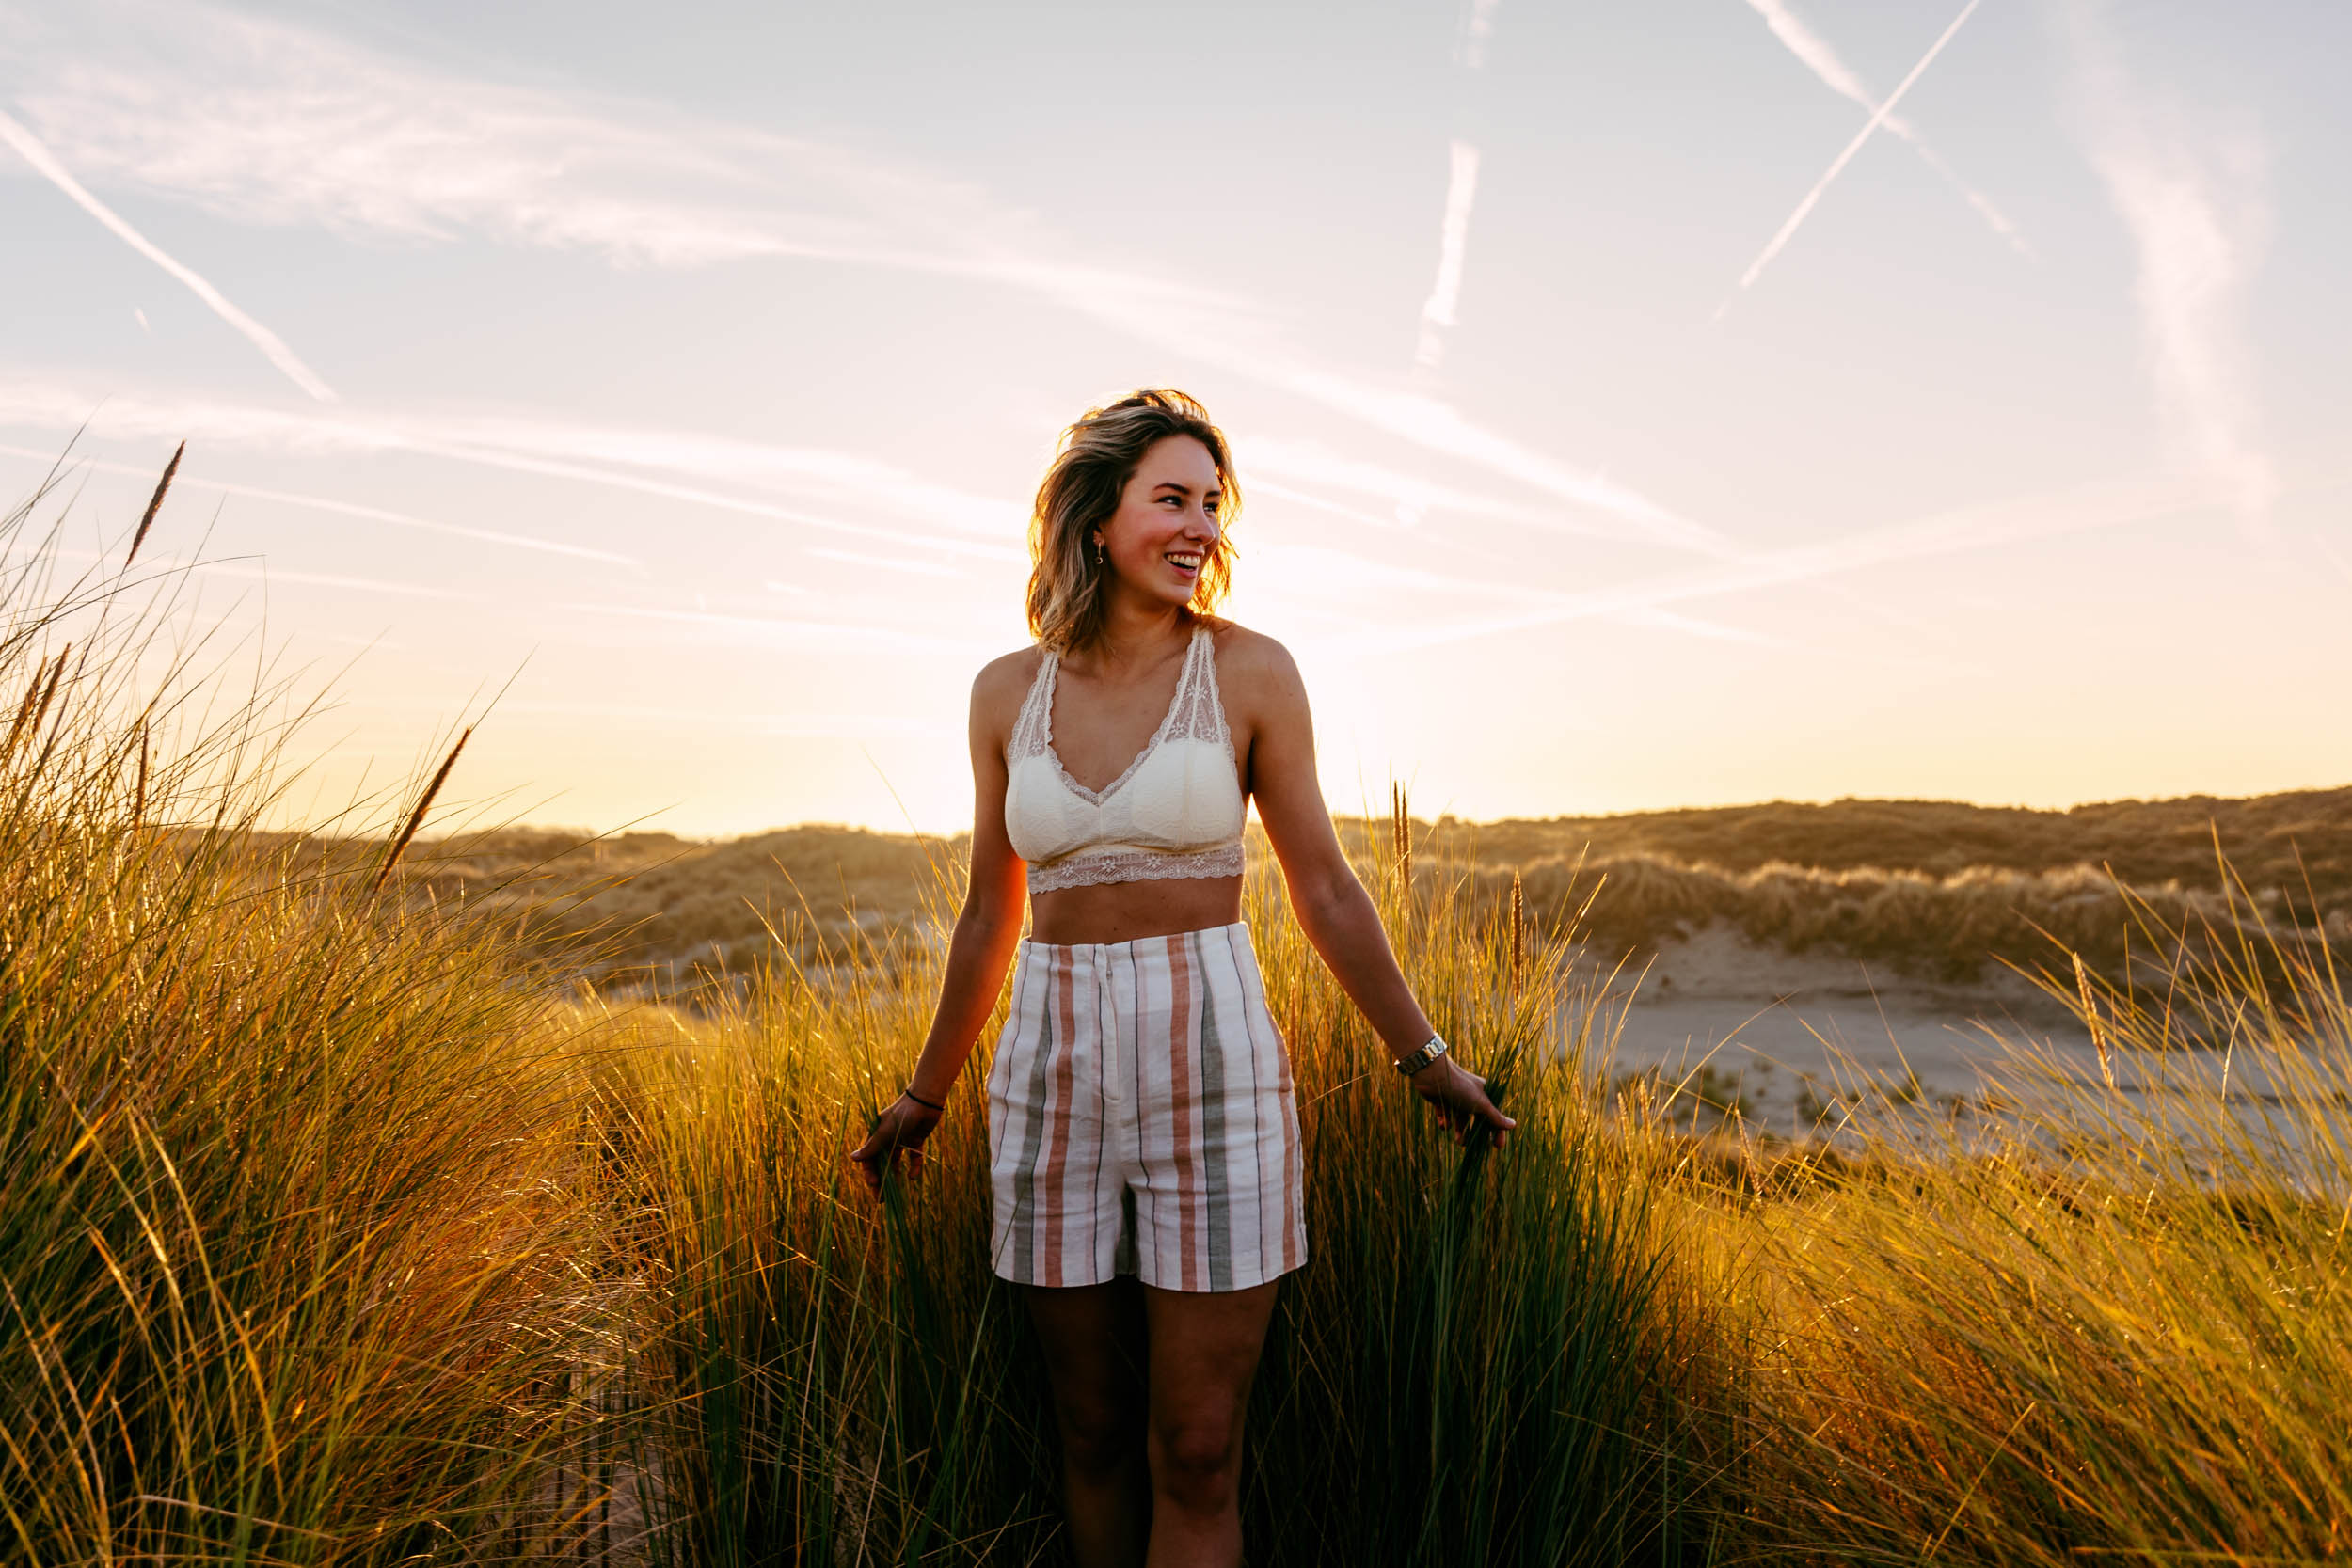 A woman poses for beach photos in tall grass at sunset.